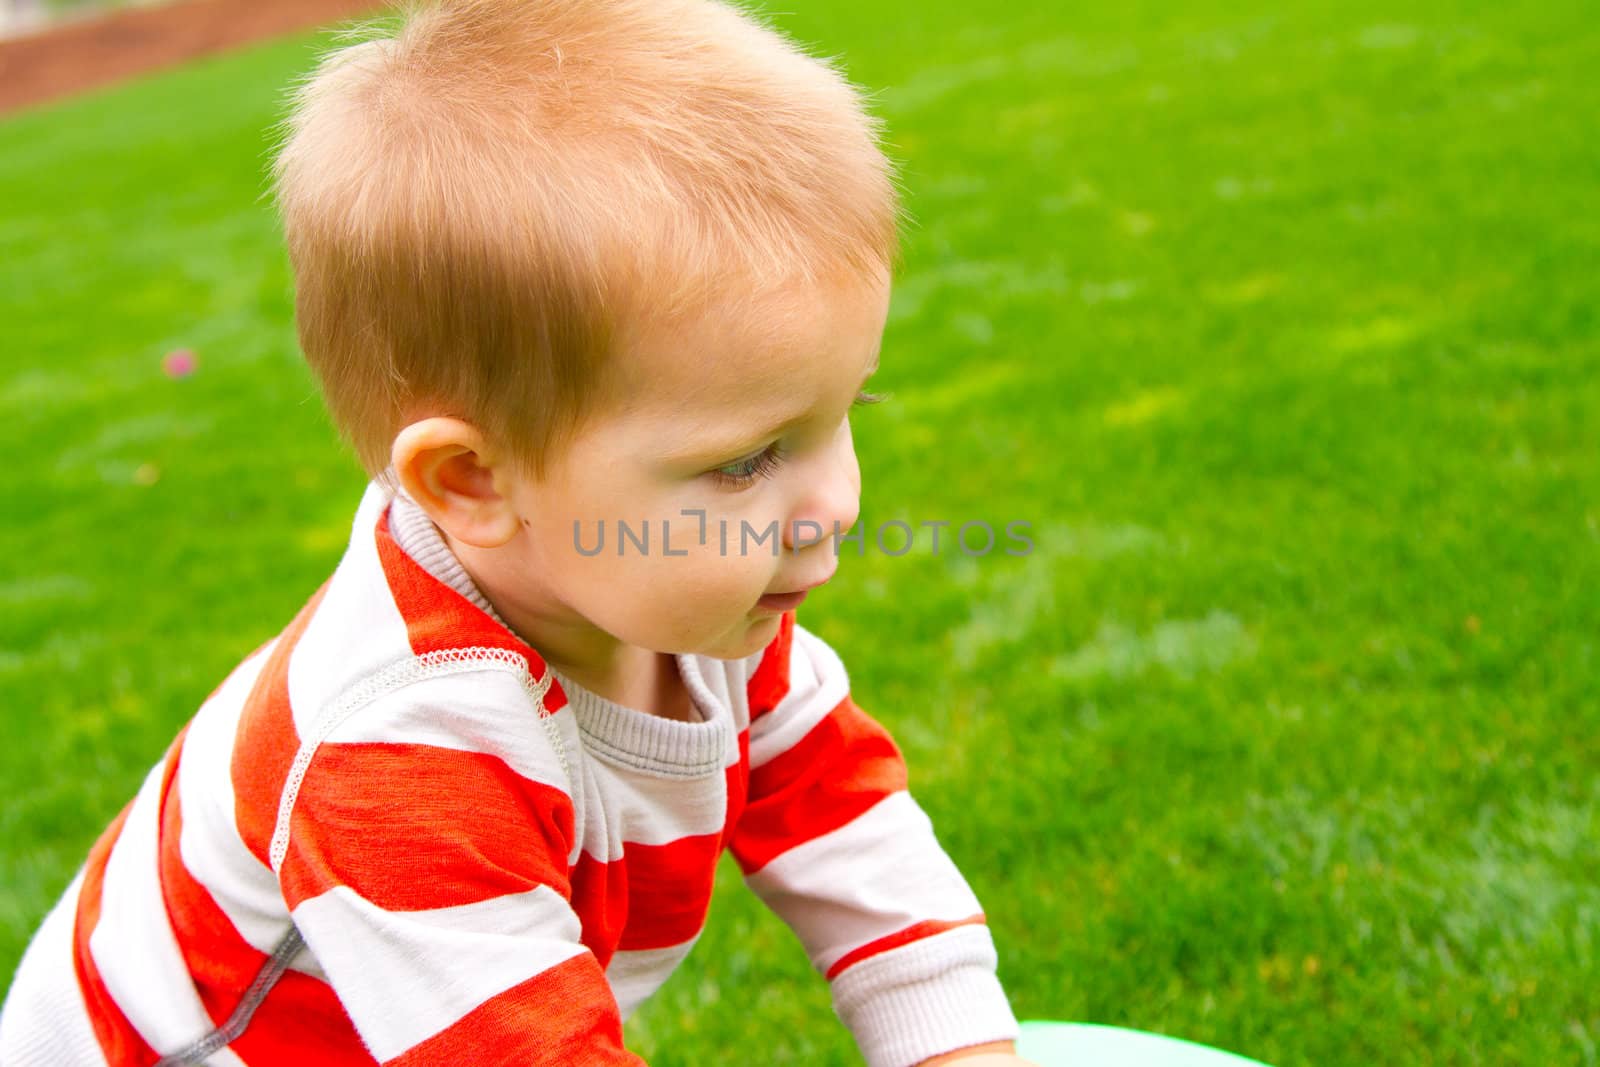 A portrait of a young boy playing outdoors wearing a red and white striped shirt.